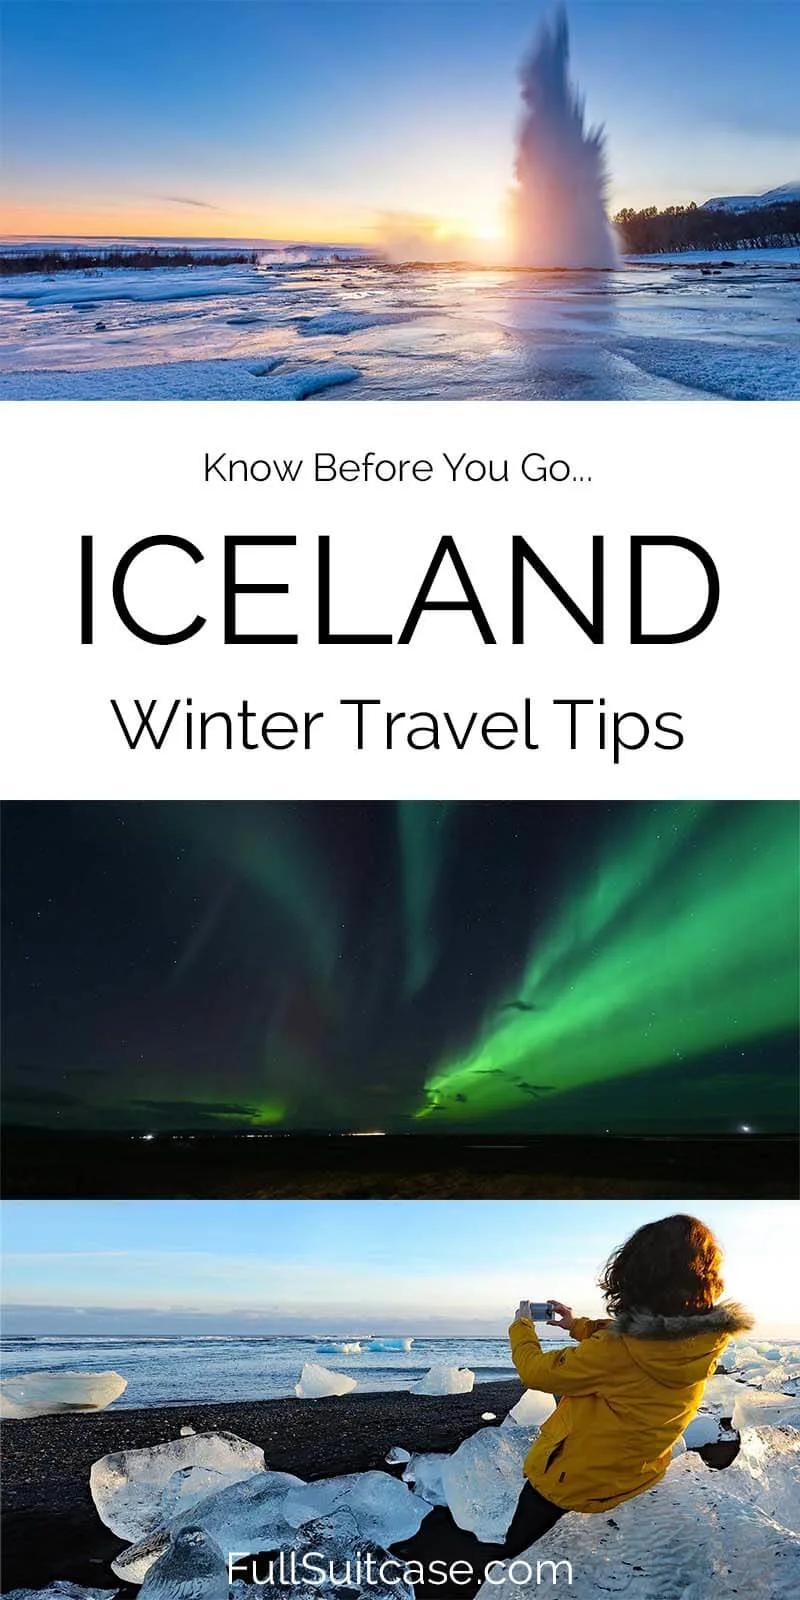 Iceland winter travel tips and advice